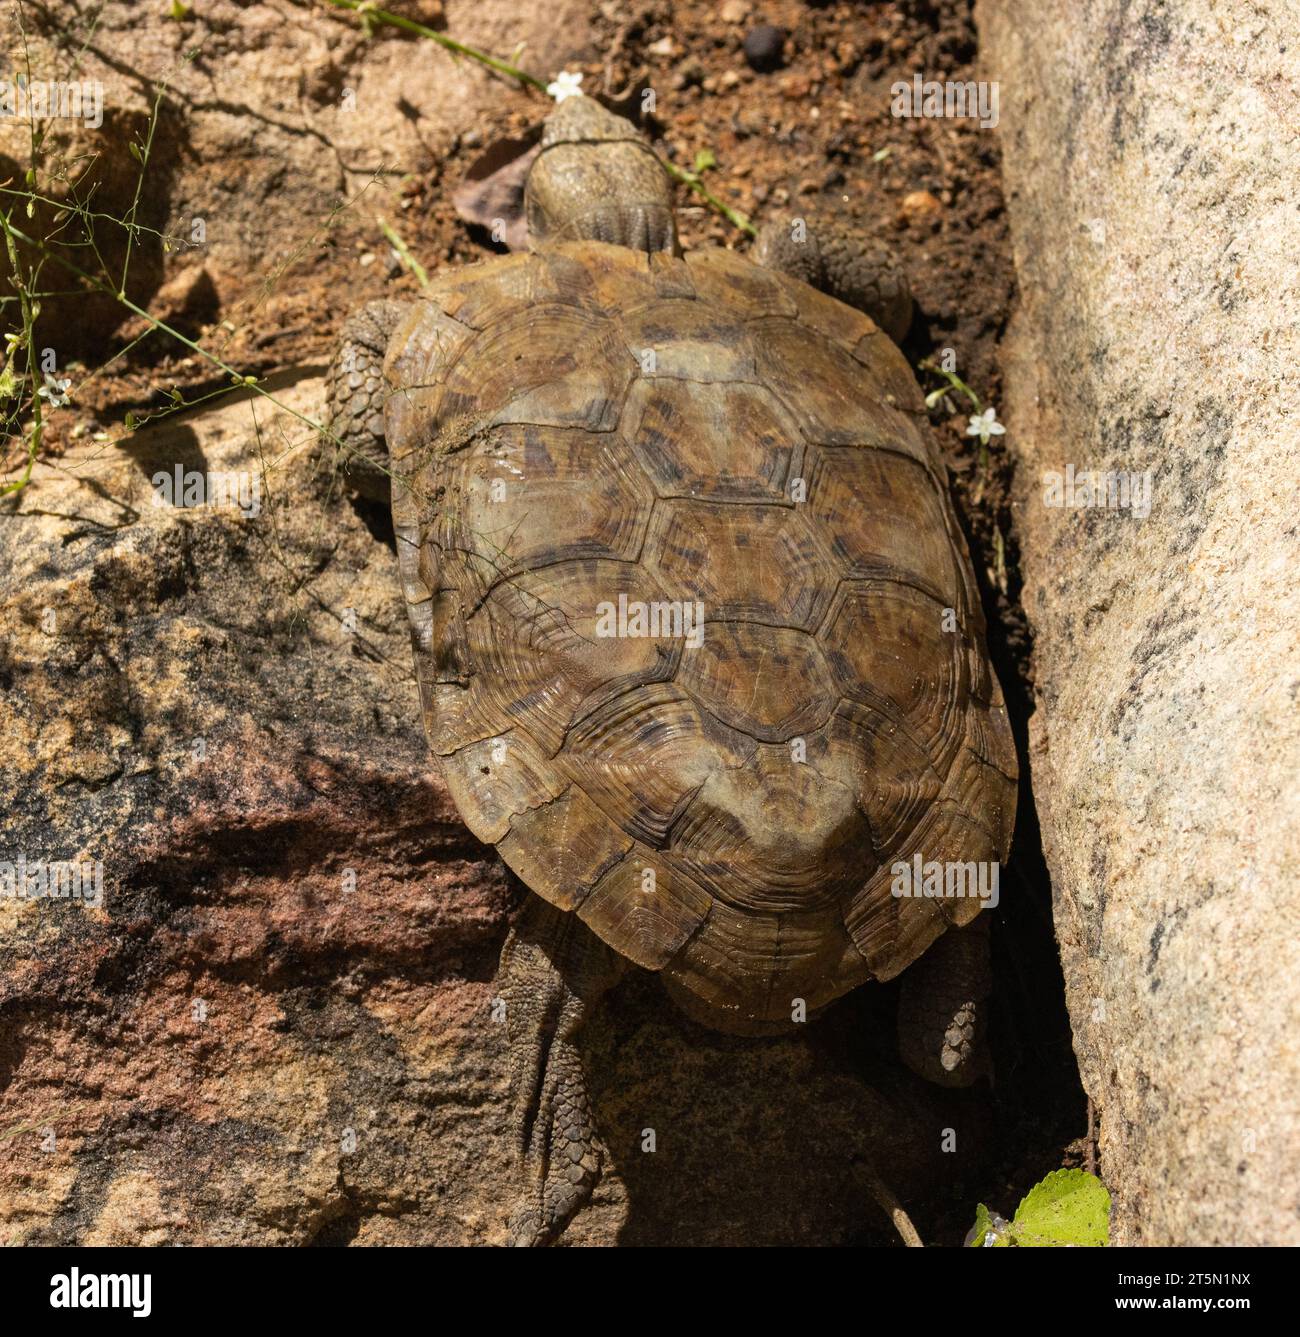 The Pancake Tortoise is a rare endemic species restricted to koppie areas in East Africa. The carapace is unique in that it is semi-flexible, enabling Stock Photo